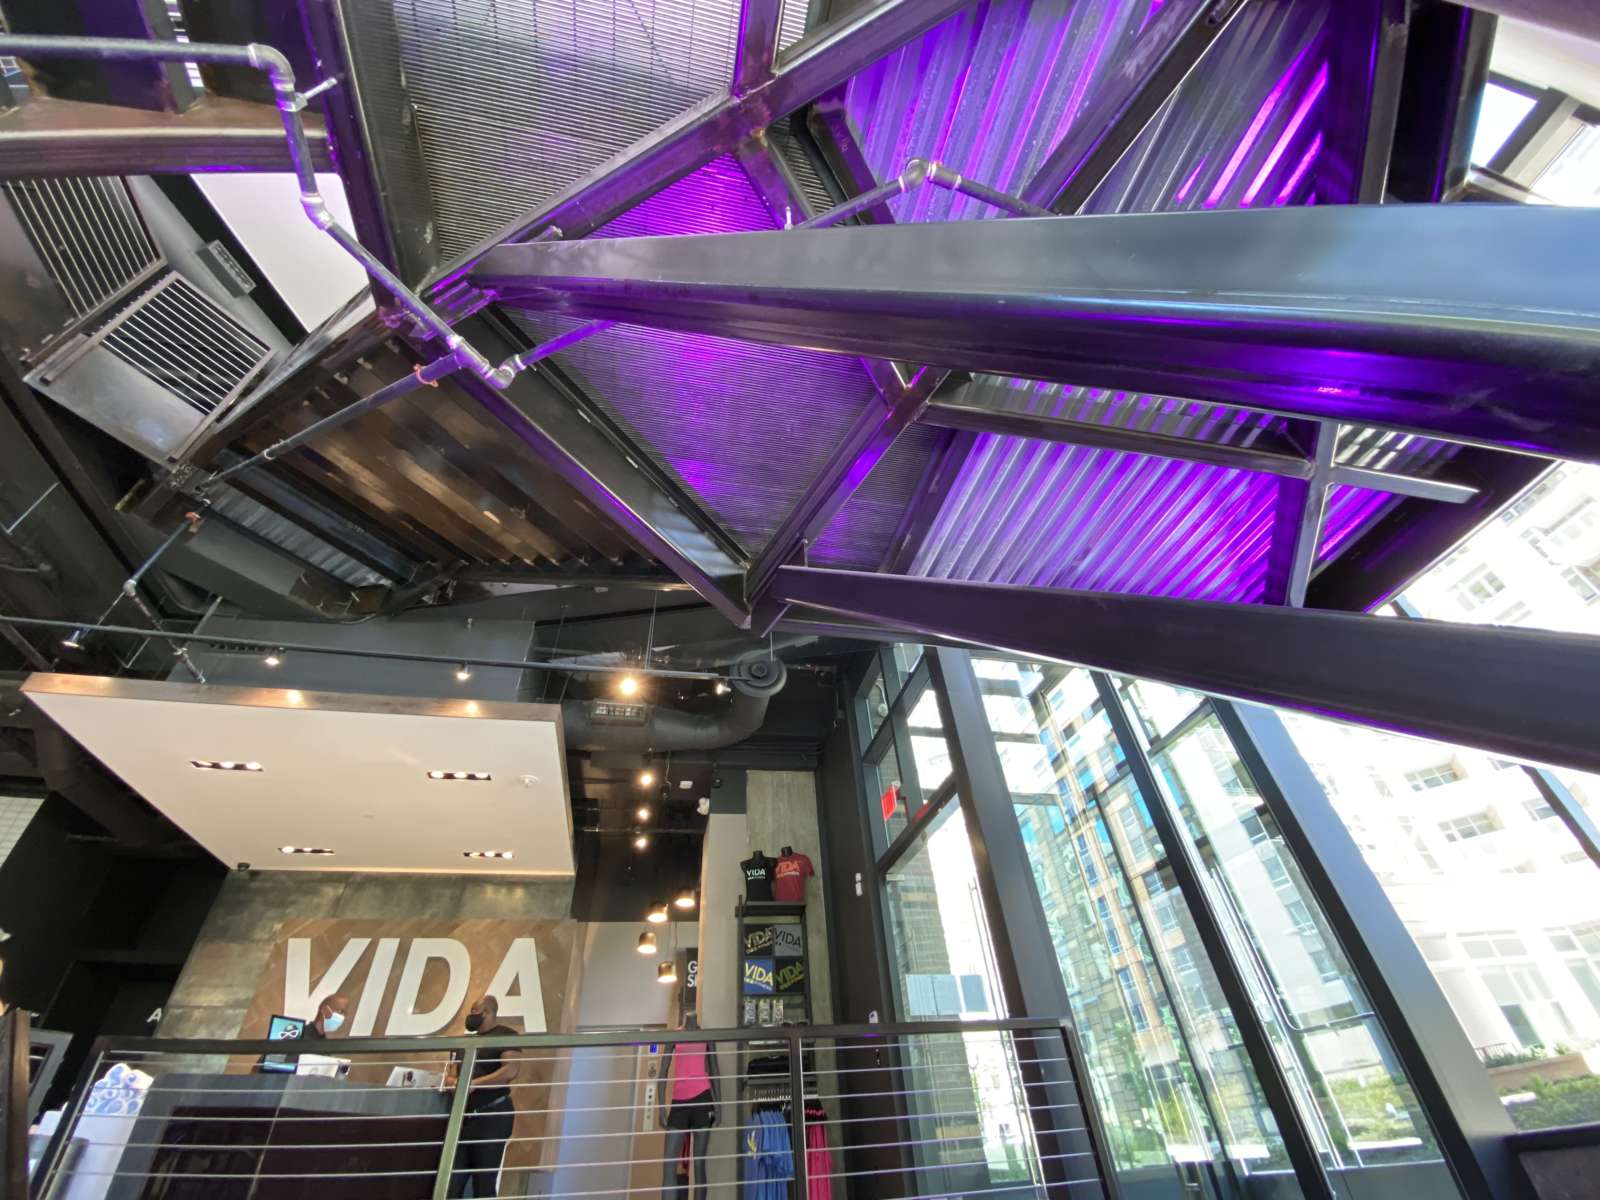 VIDA Fitness in Ballston survived the pandemic and is throwing a belated grand opening party | ARLnow.com